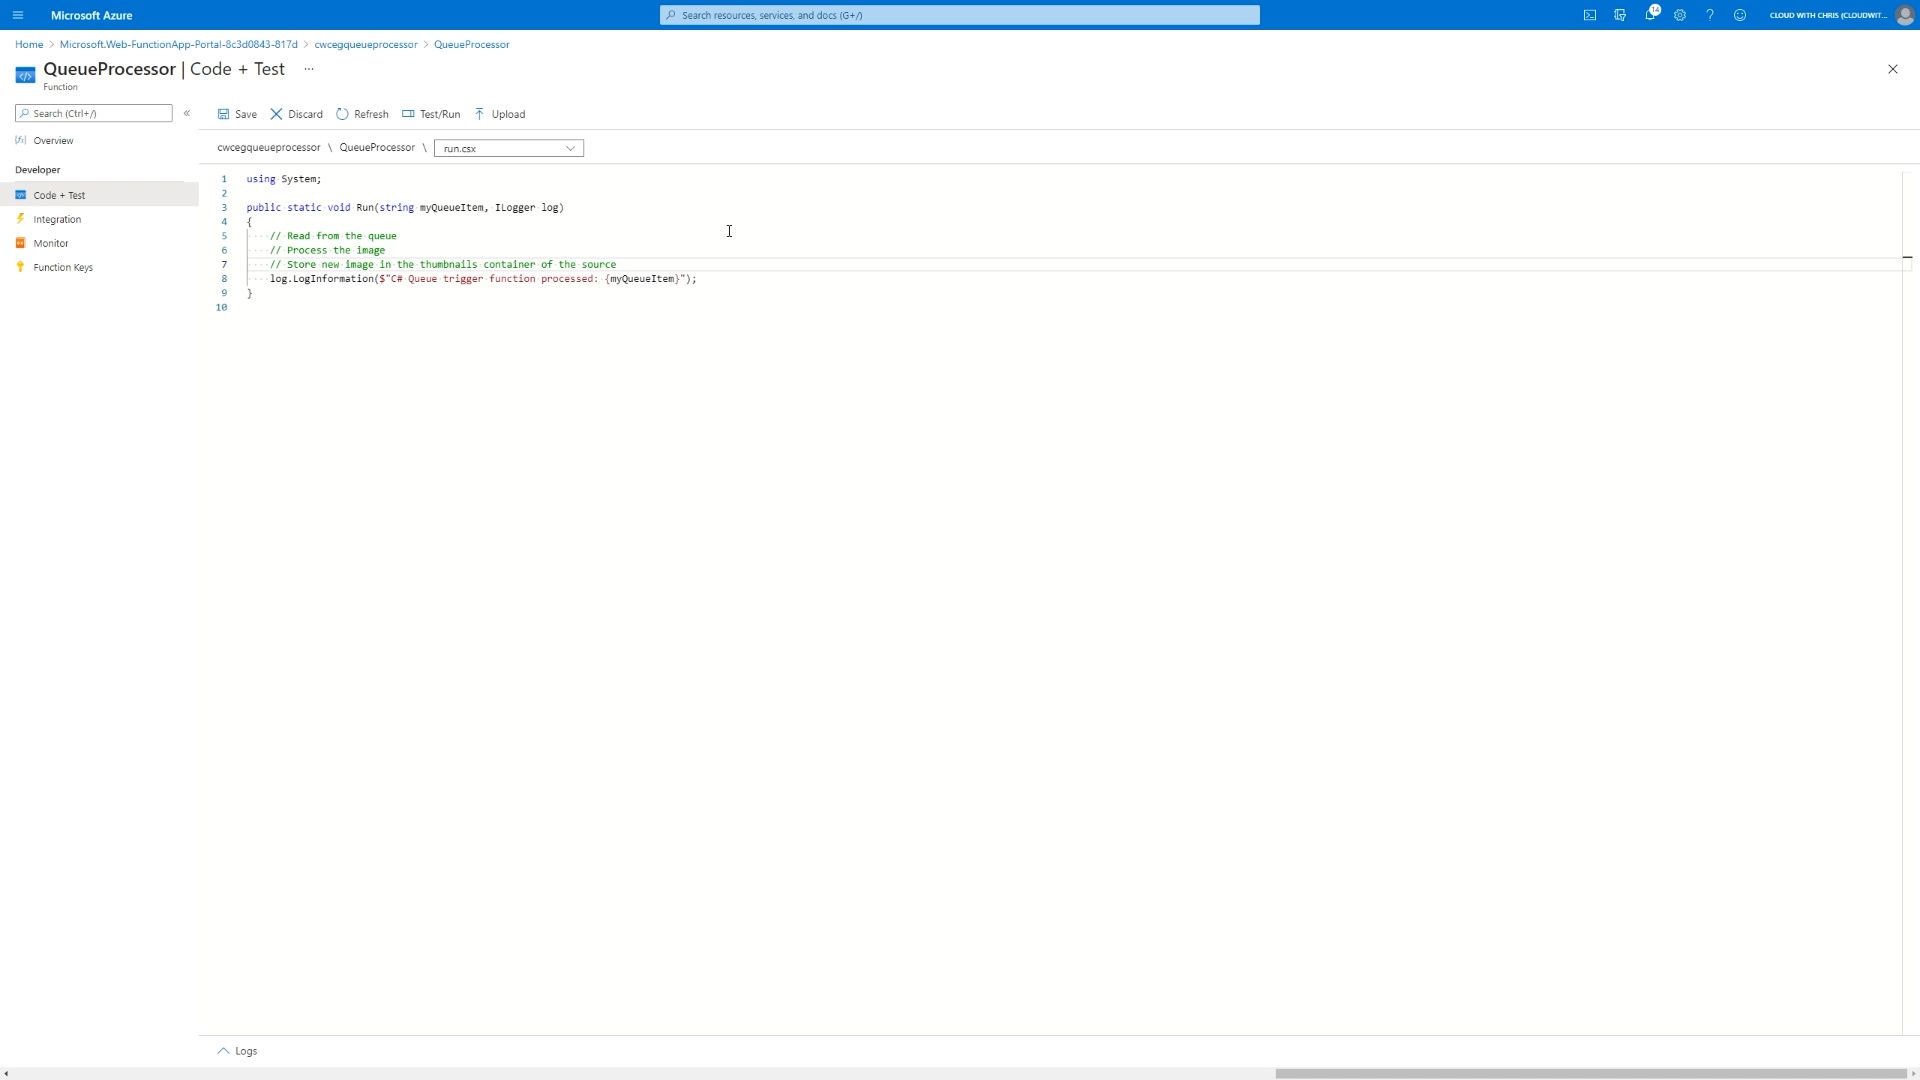 Screenshot showing the code for the Azure Function